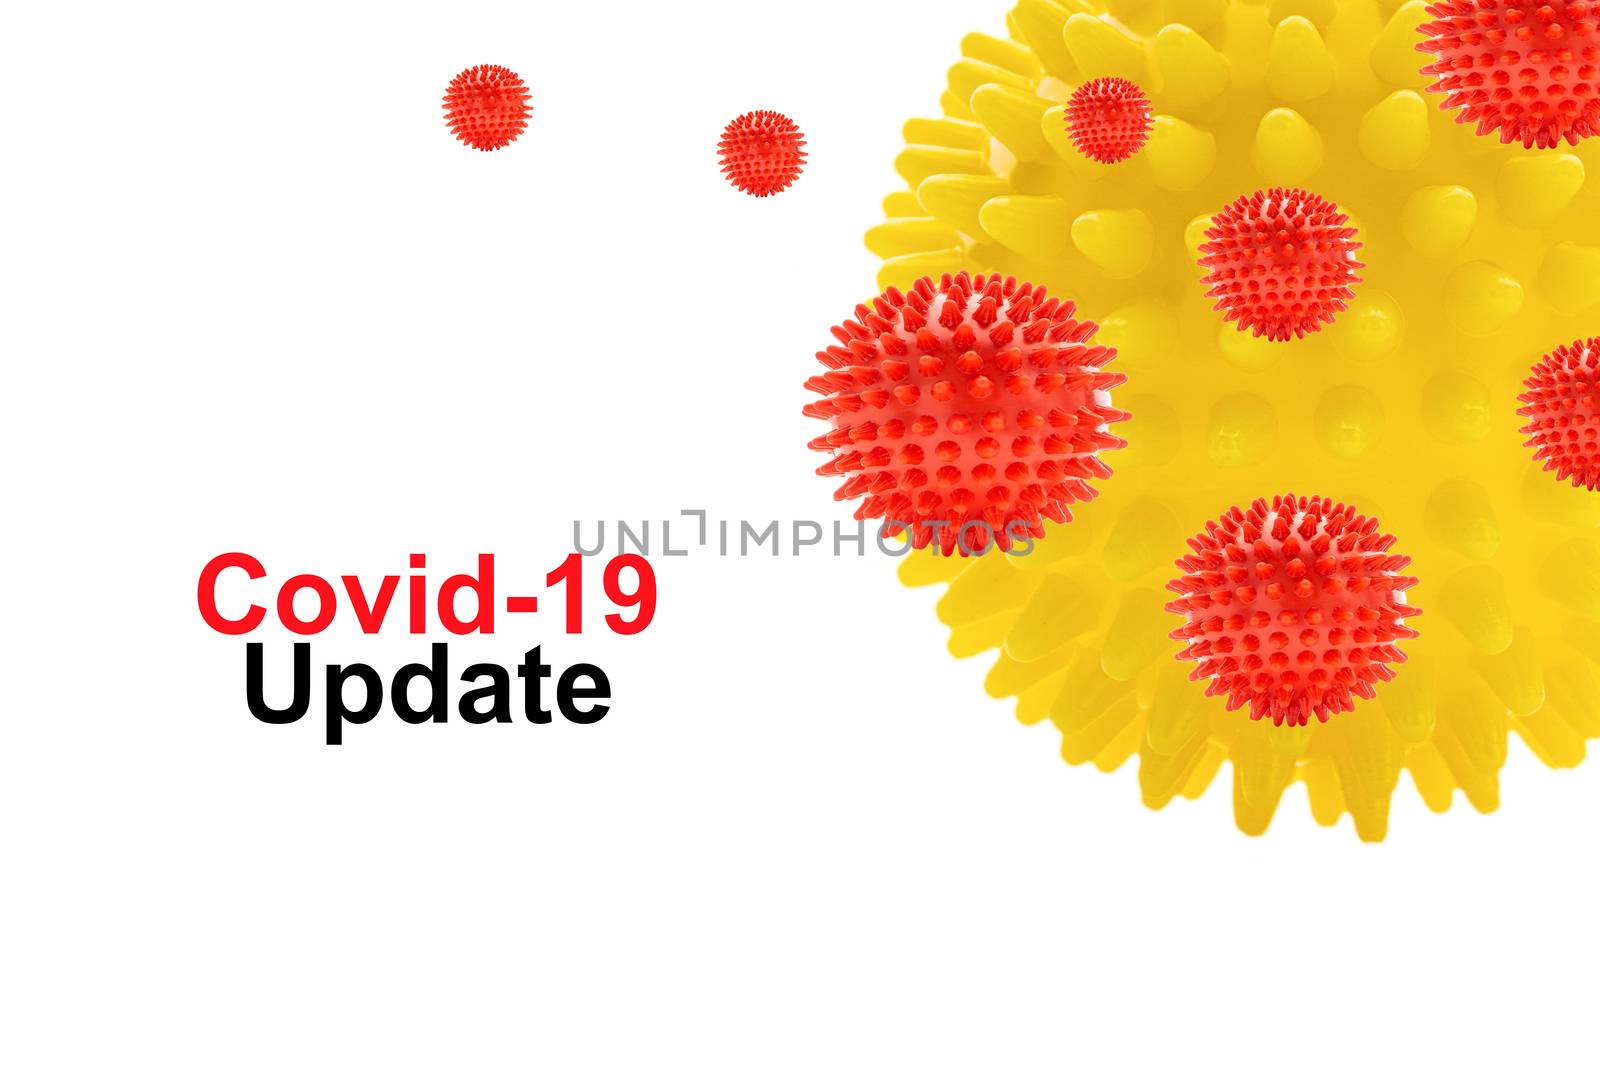 COVID-19 UPDATE text on white background. Covid-19 or Coronavirus by silverwings